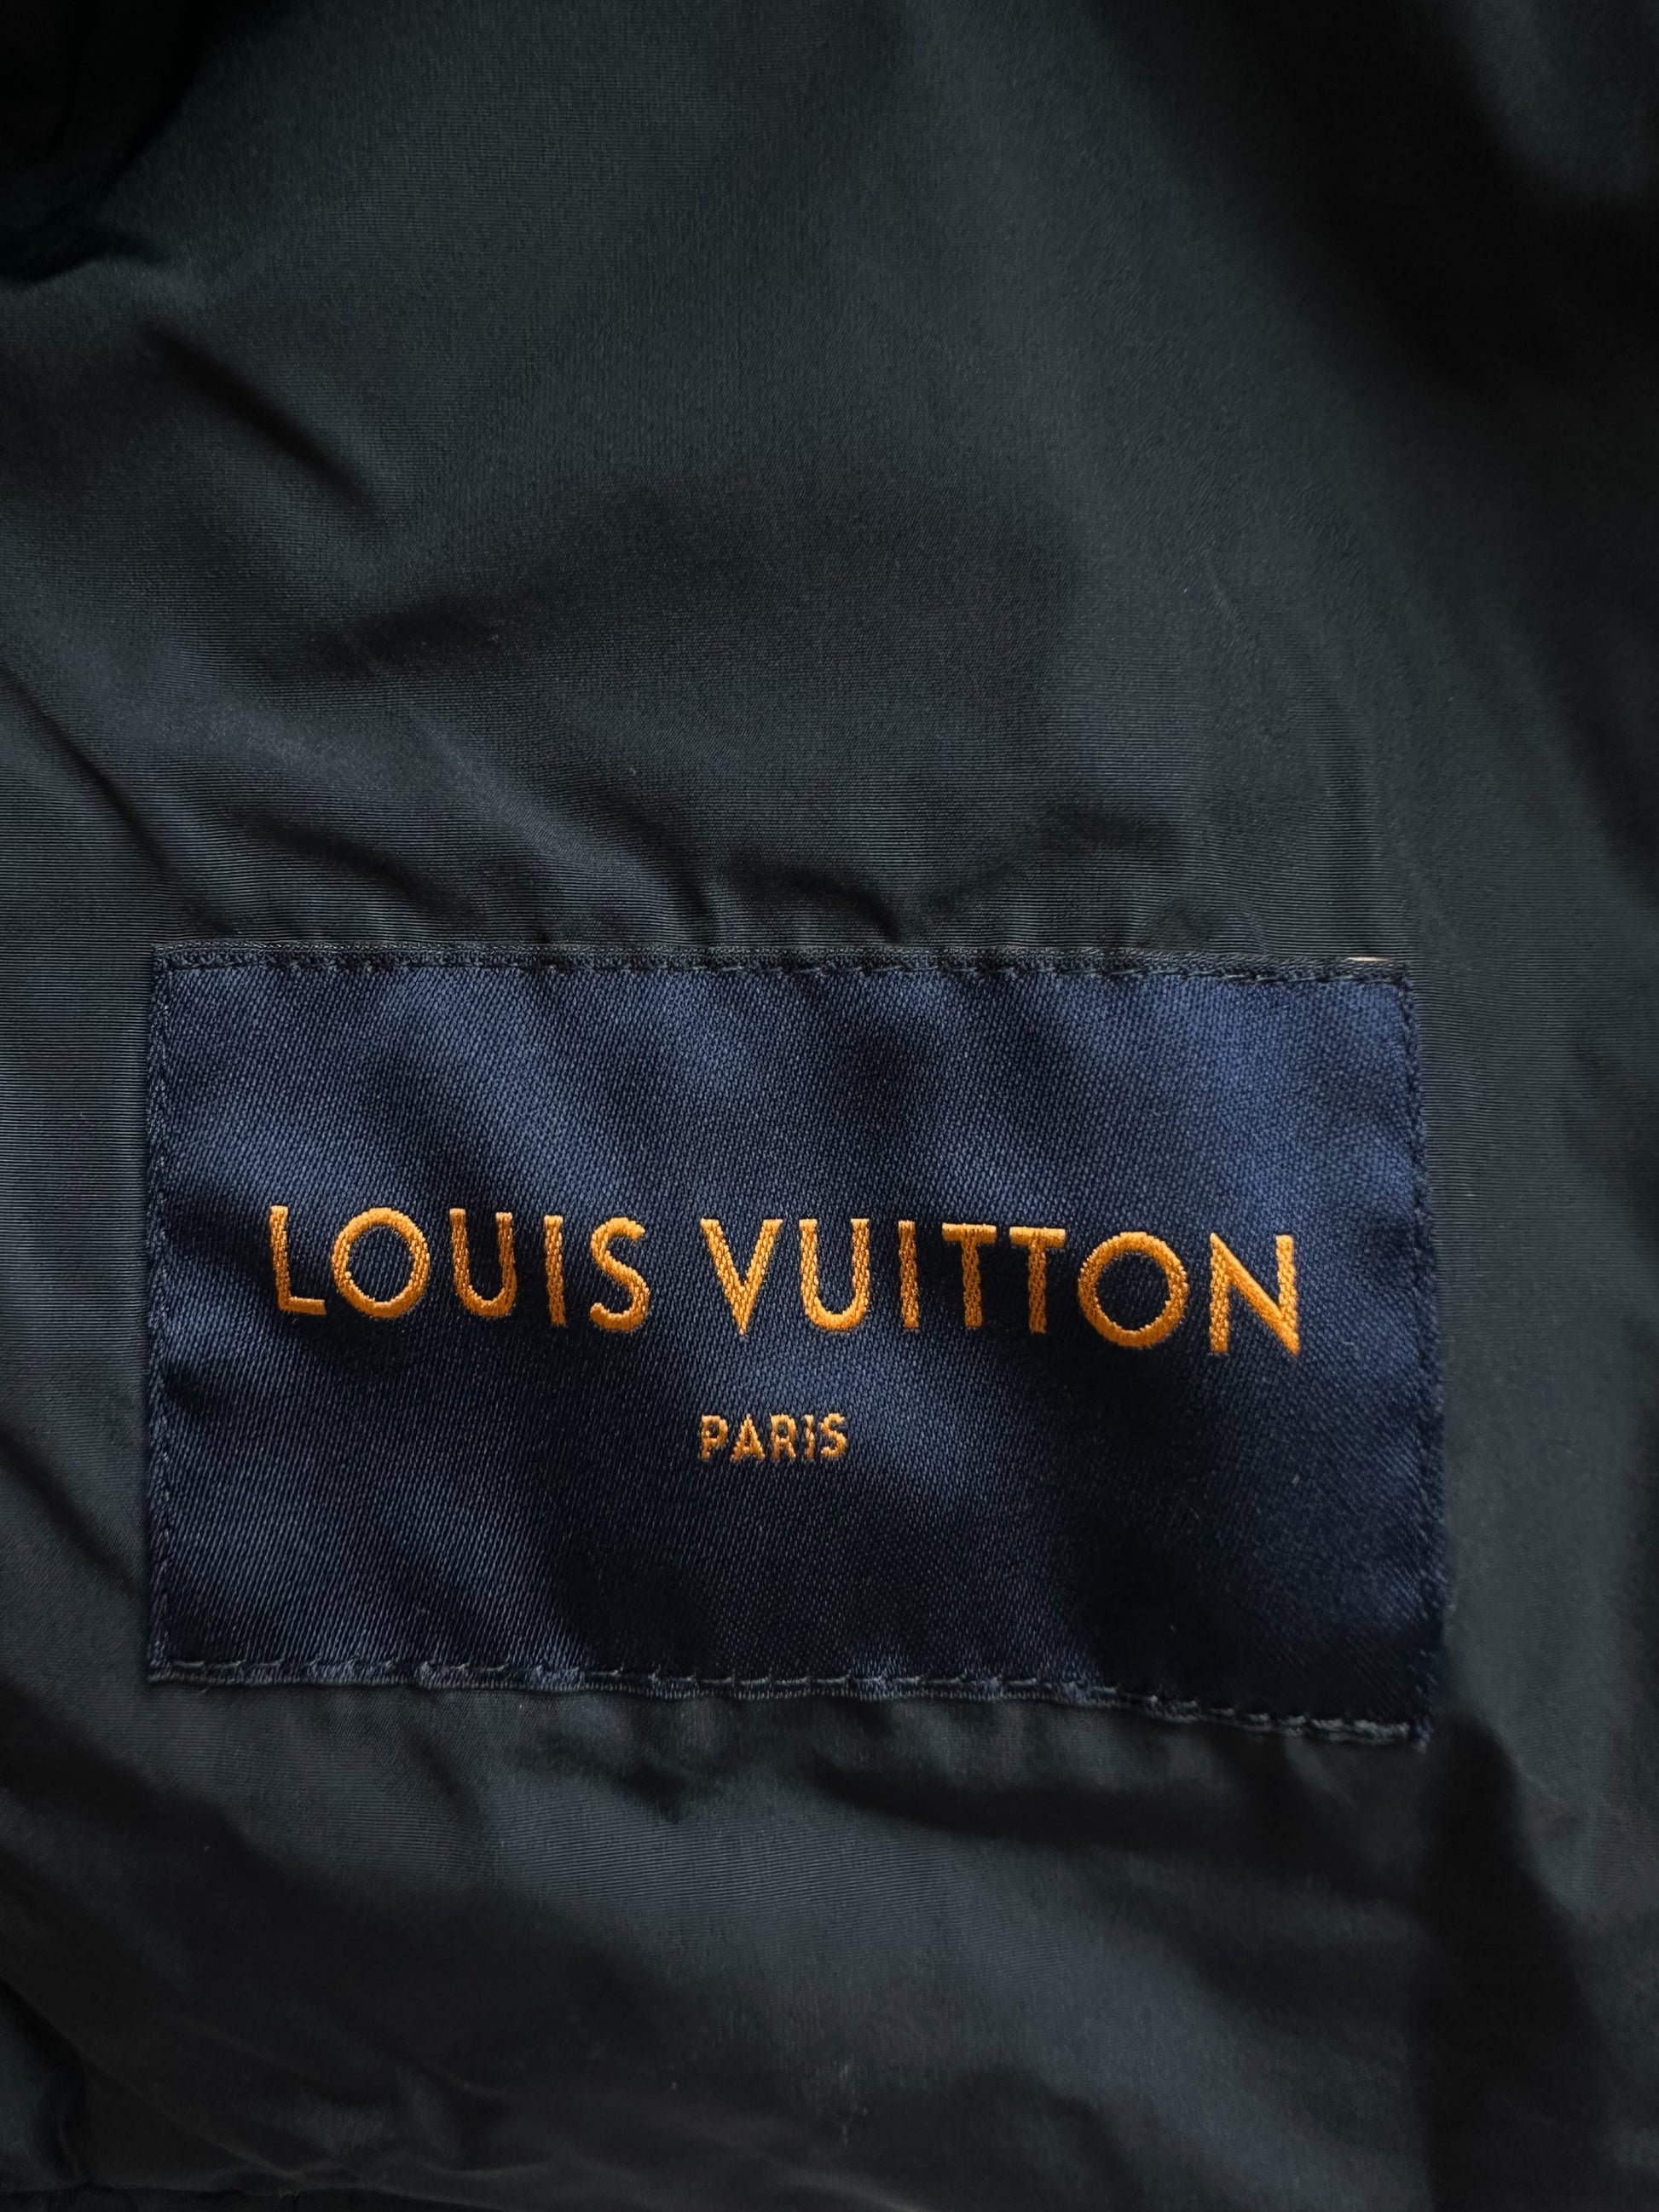 Louis Vuitton Logo Embroidered Front Zip Striped Jacket in Navy